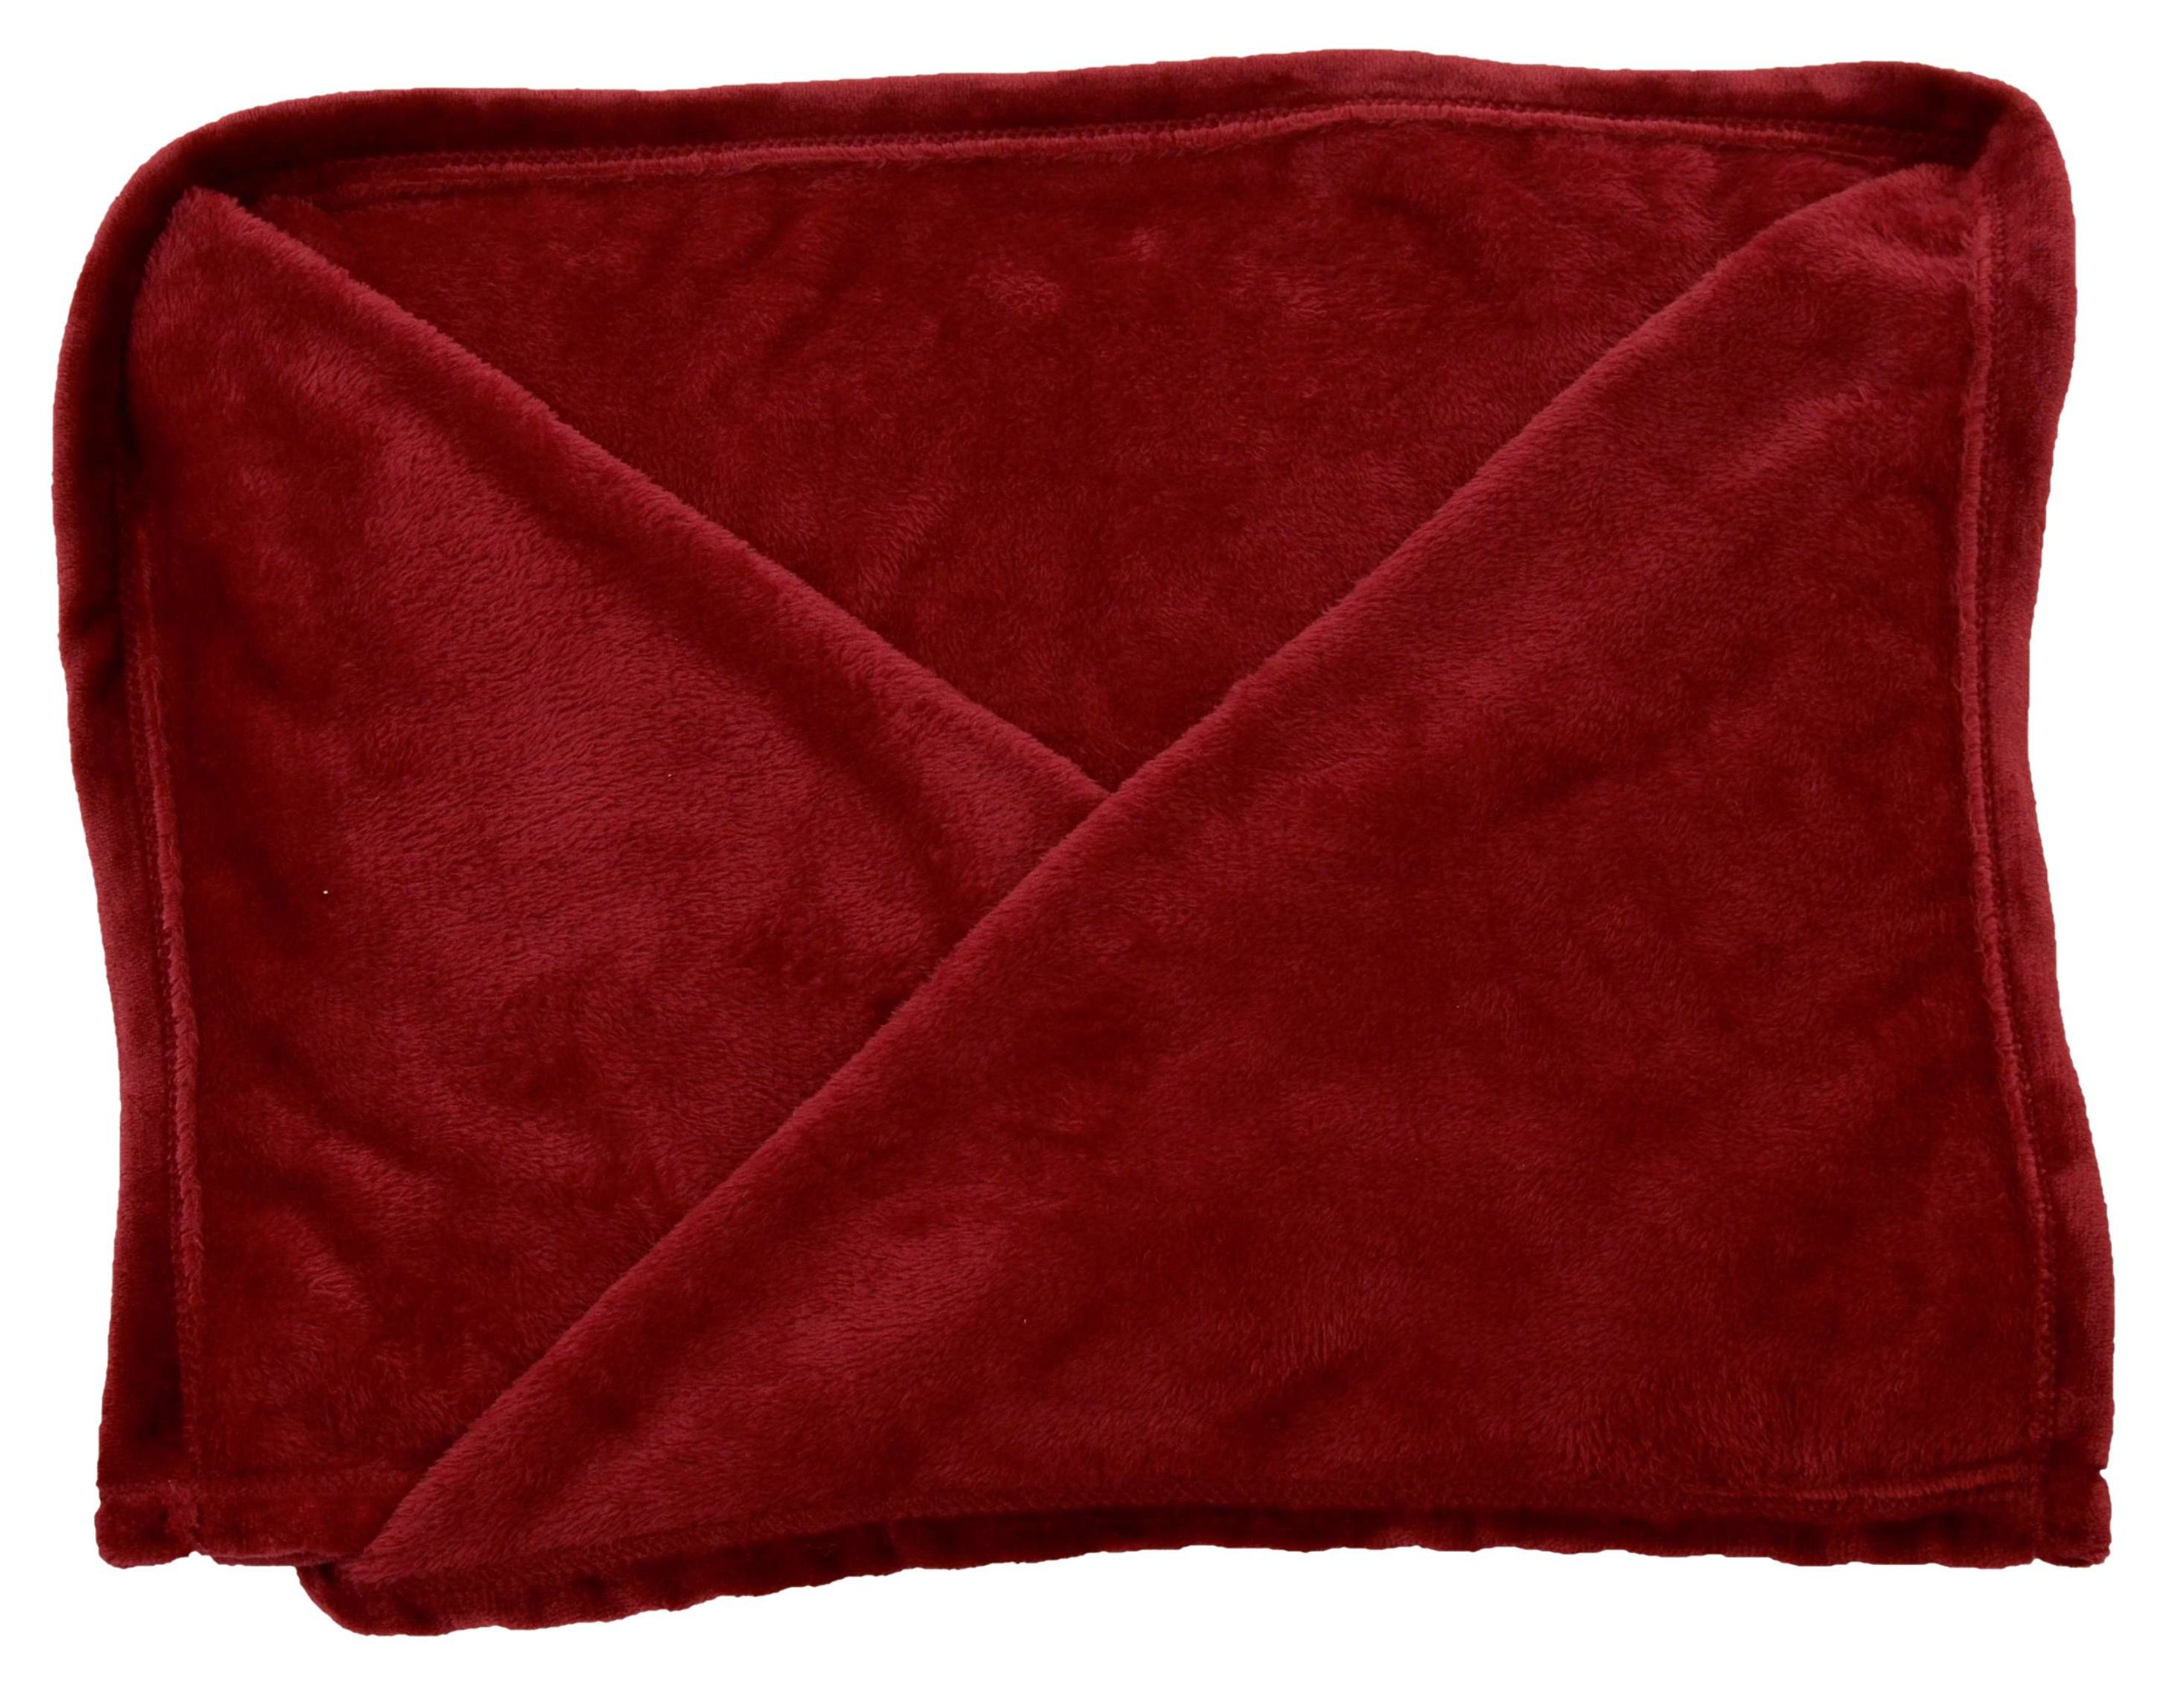 Snuggle blanket Snuggle fleece blanket XL with sleeves red 170x200cm